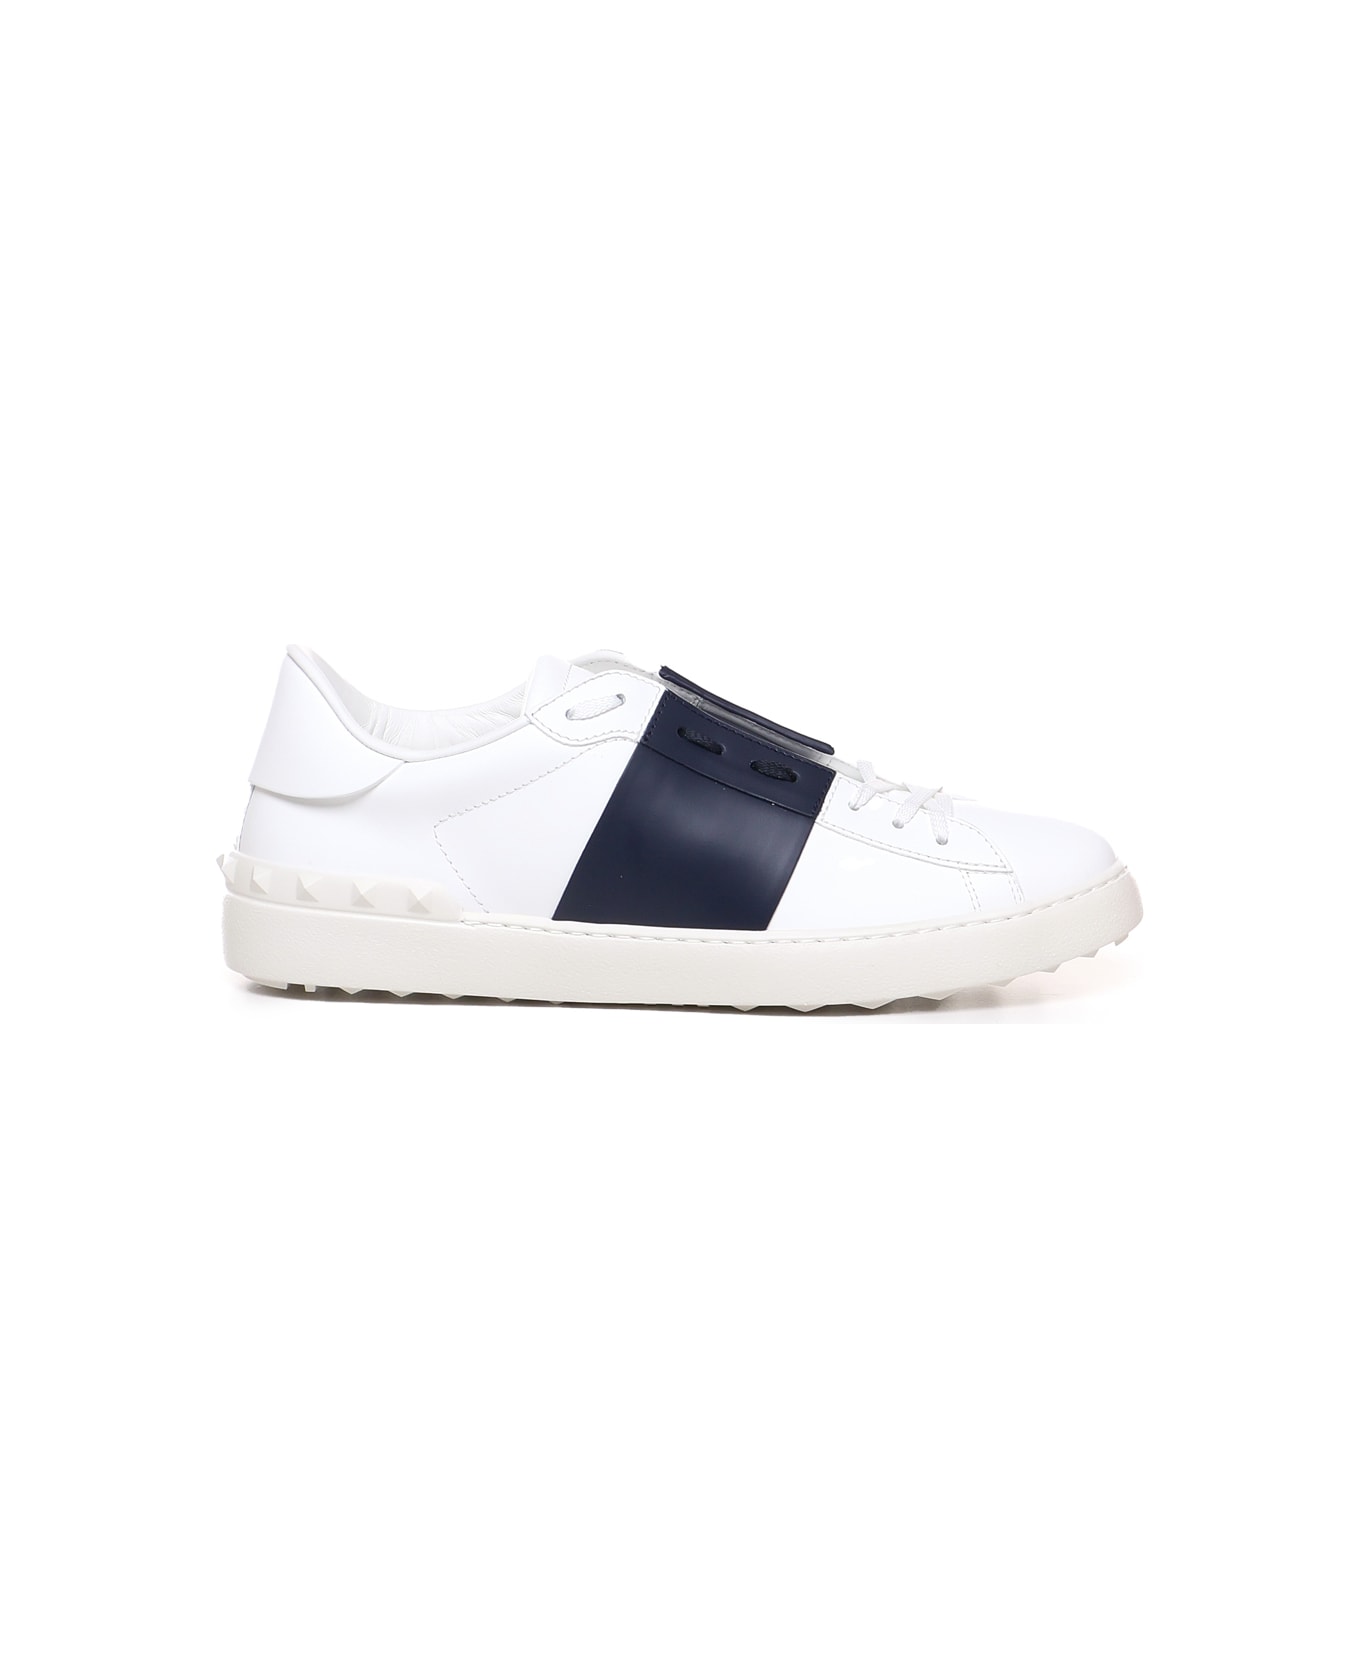 Valentino Garavani Open Sneakers In Leather With Contrasting Band - white/marine スニーカー